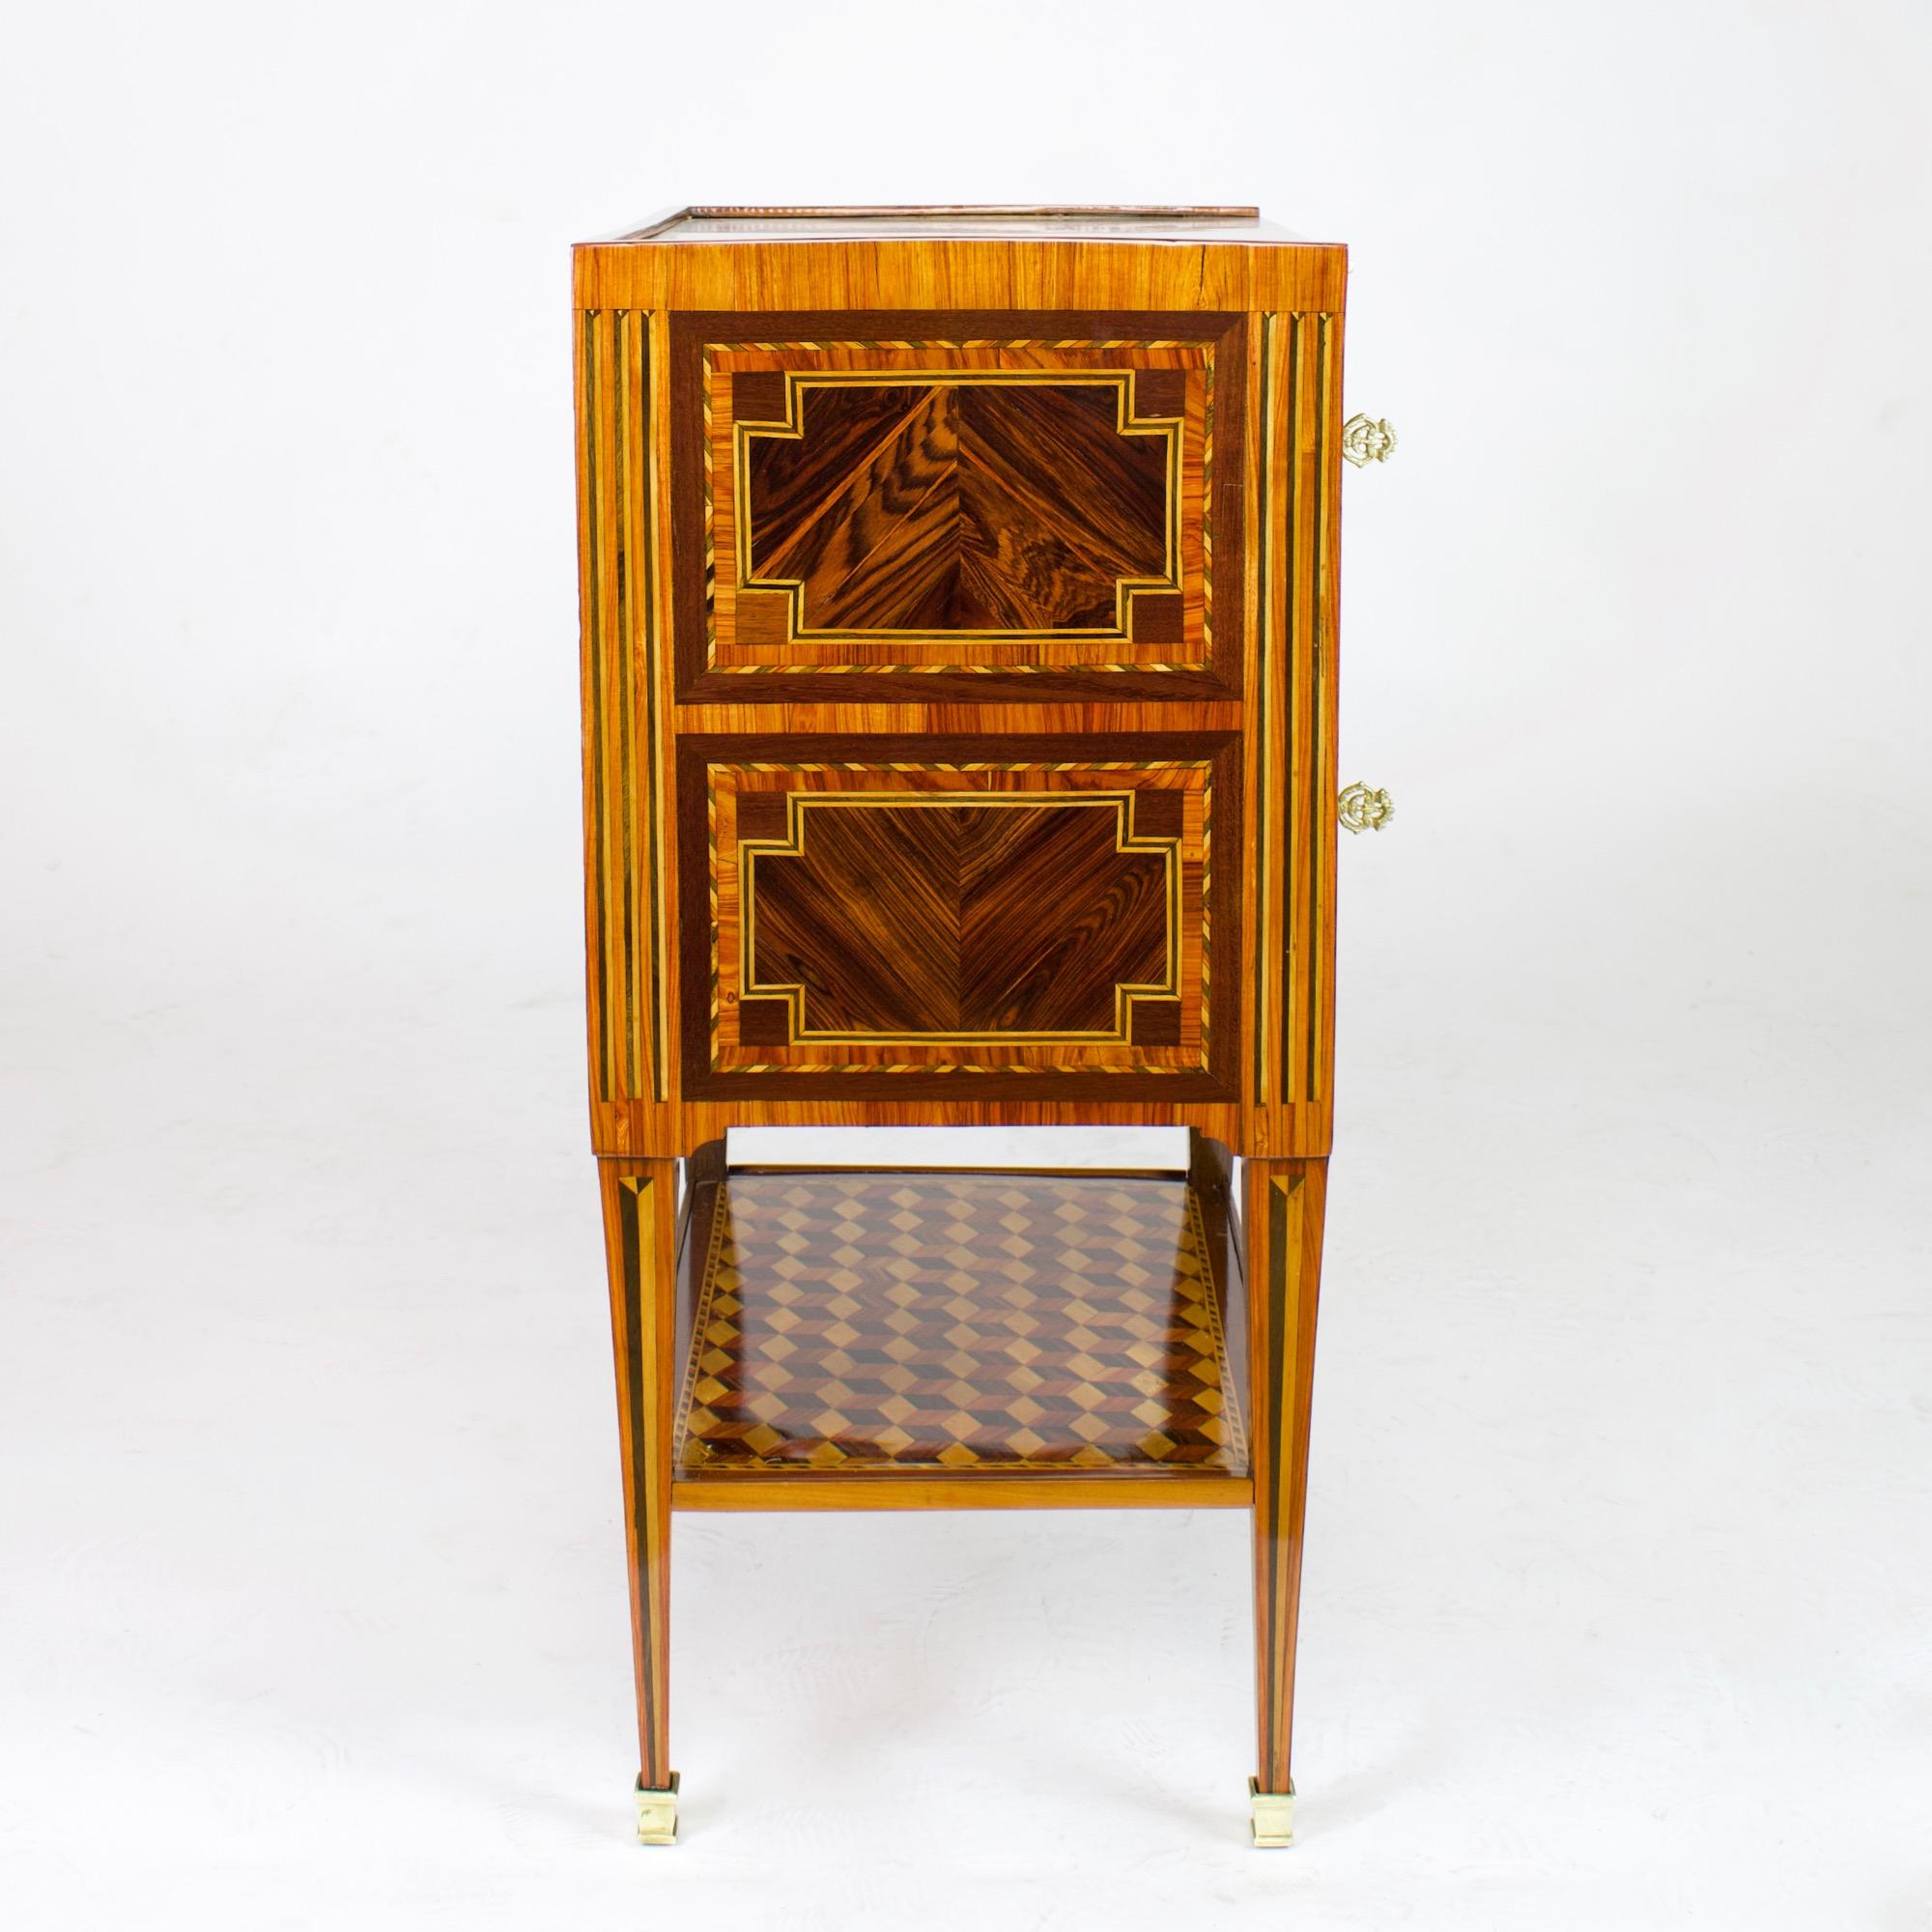 Late 18th Century 18th Century French Small Louis XVI Marquetry Side Table or Table Chiffonière